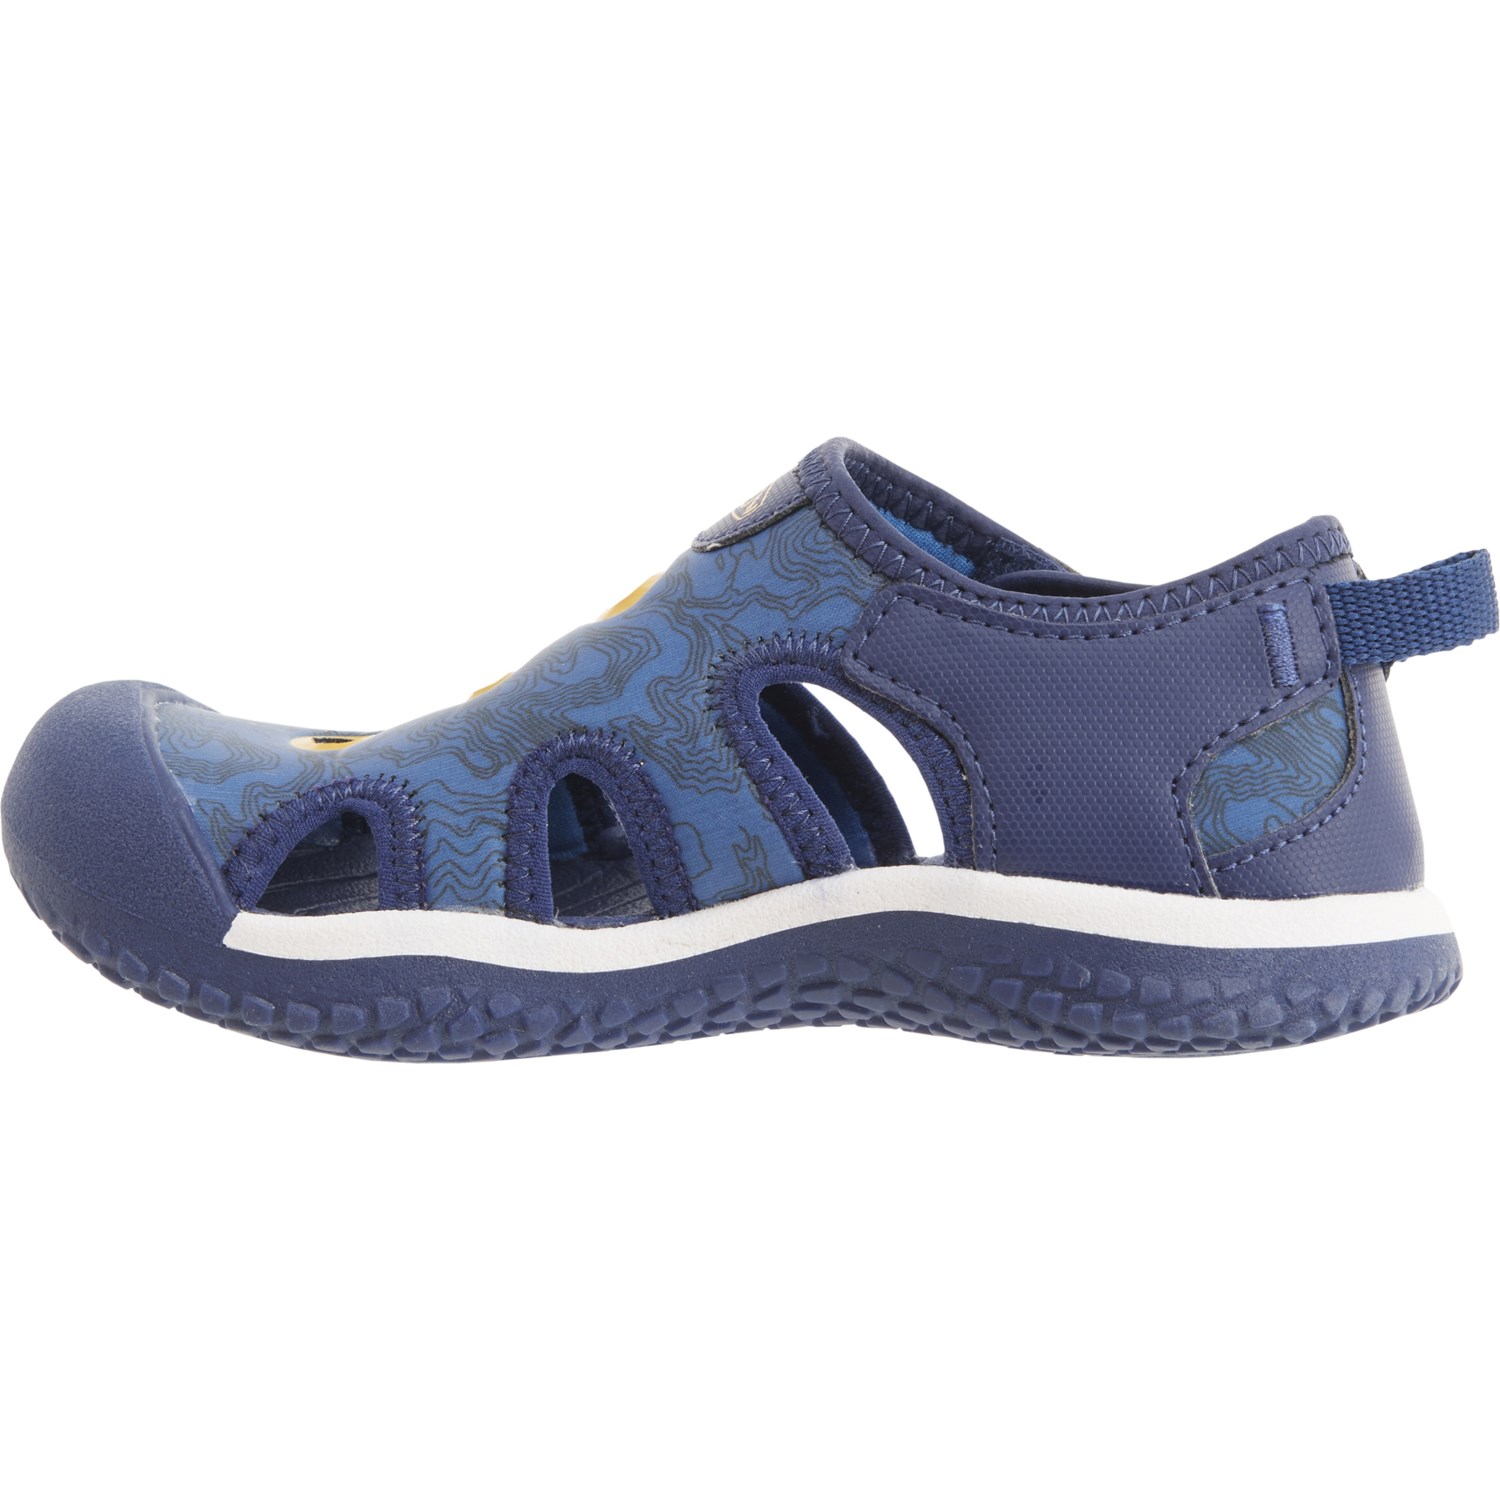 Keen Boys Stingray Water Sandals - Save 50%